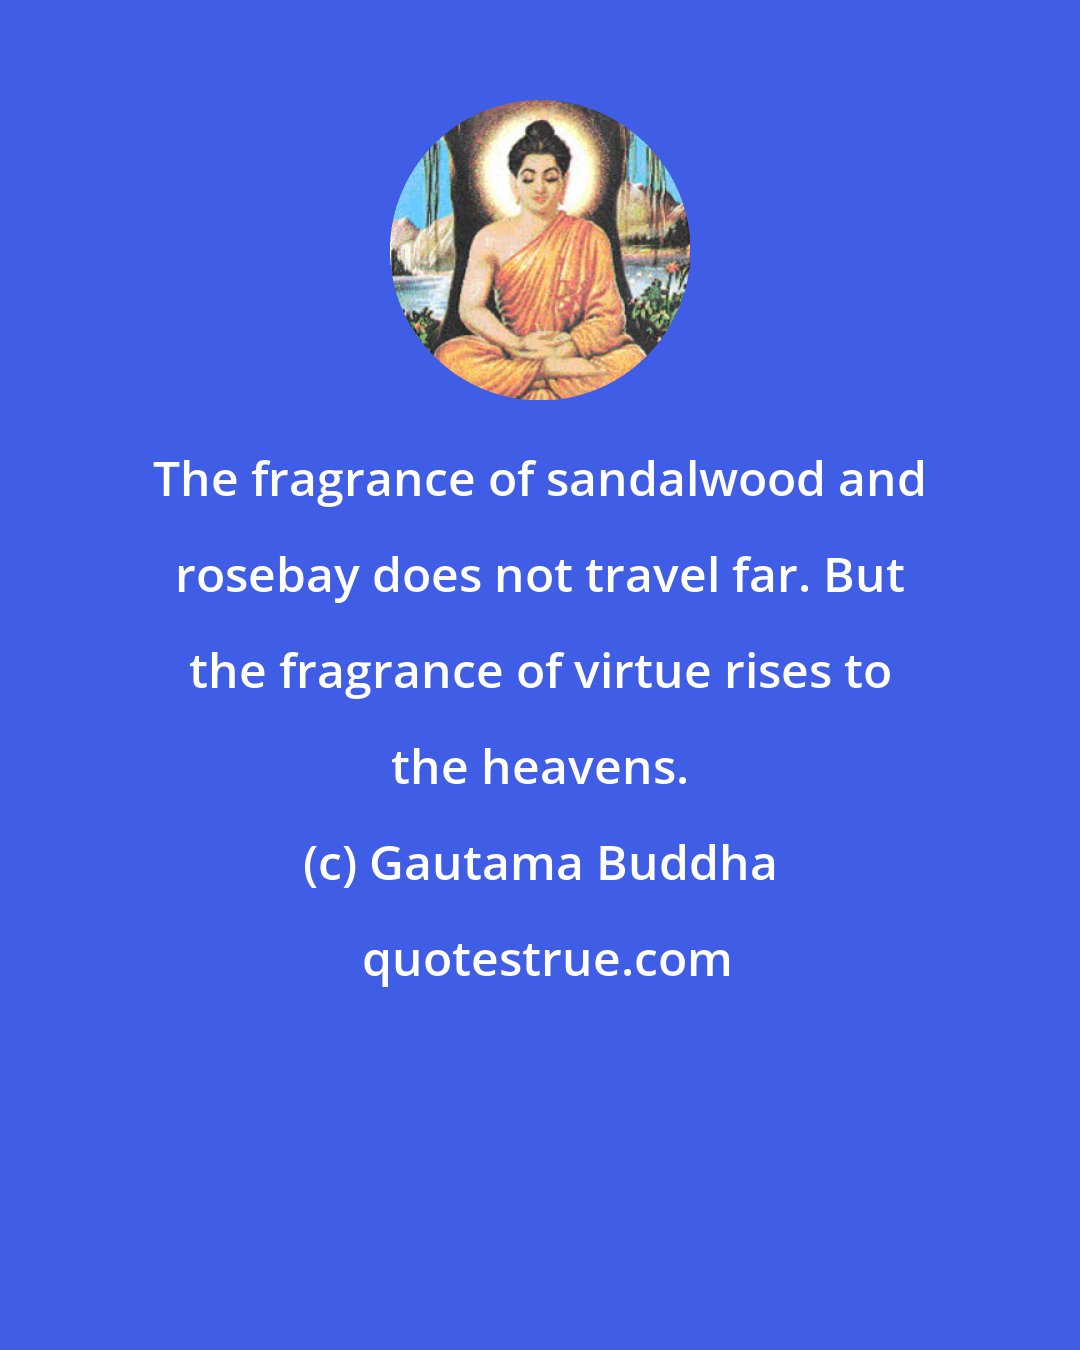 Gautama Buddha: The fragrance of sandalwood and rosebay does not travel far. But the fragrance of virtue rises to the heavens.